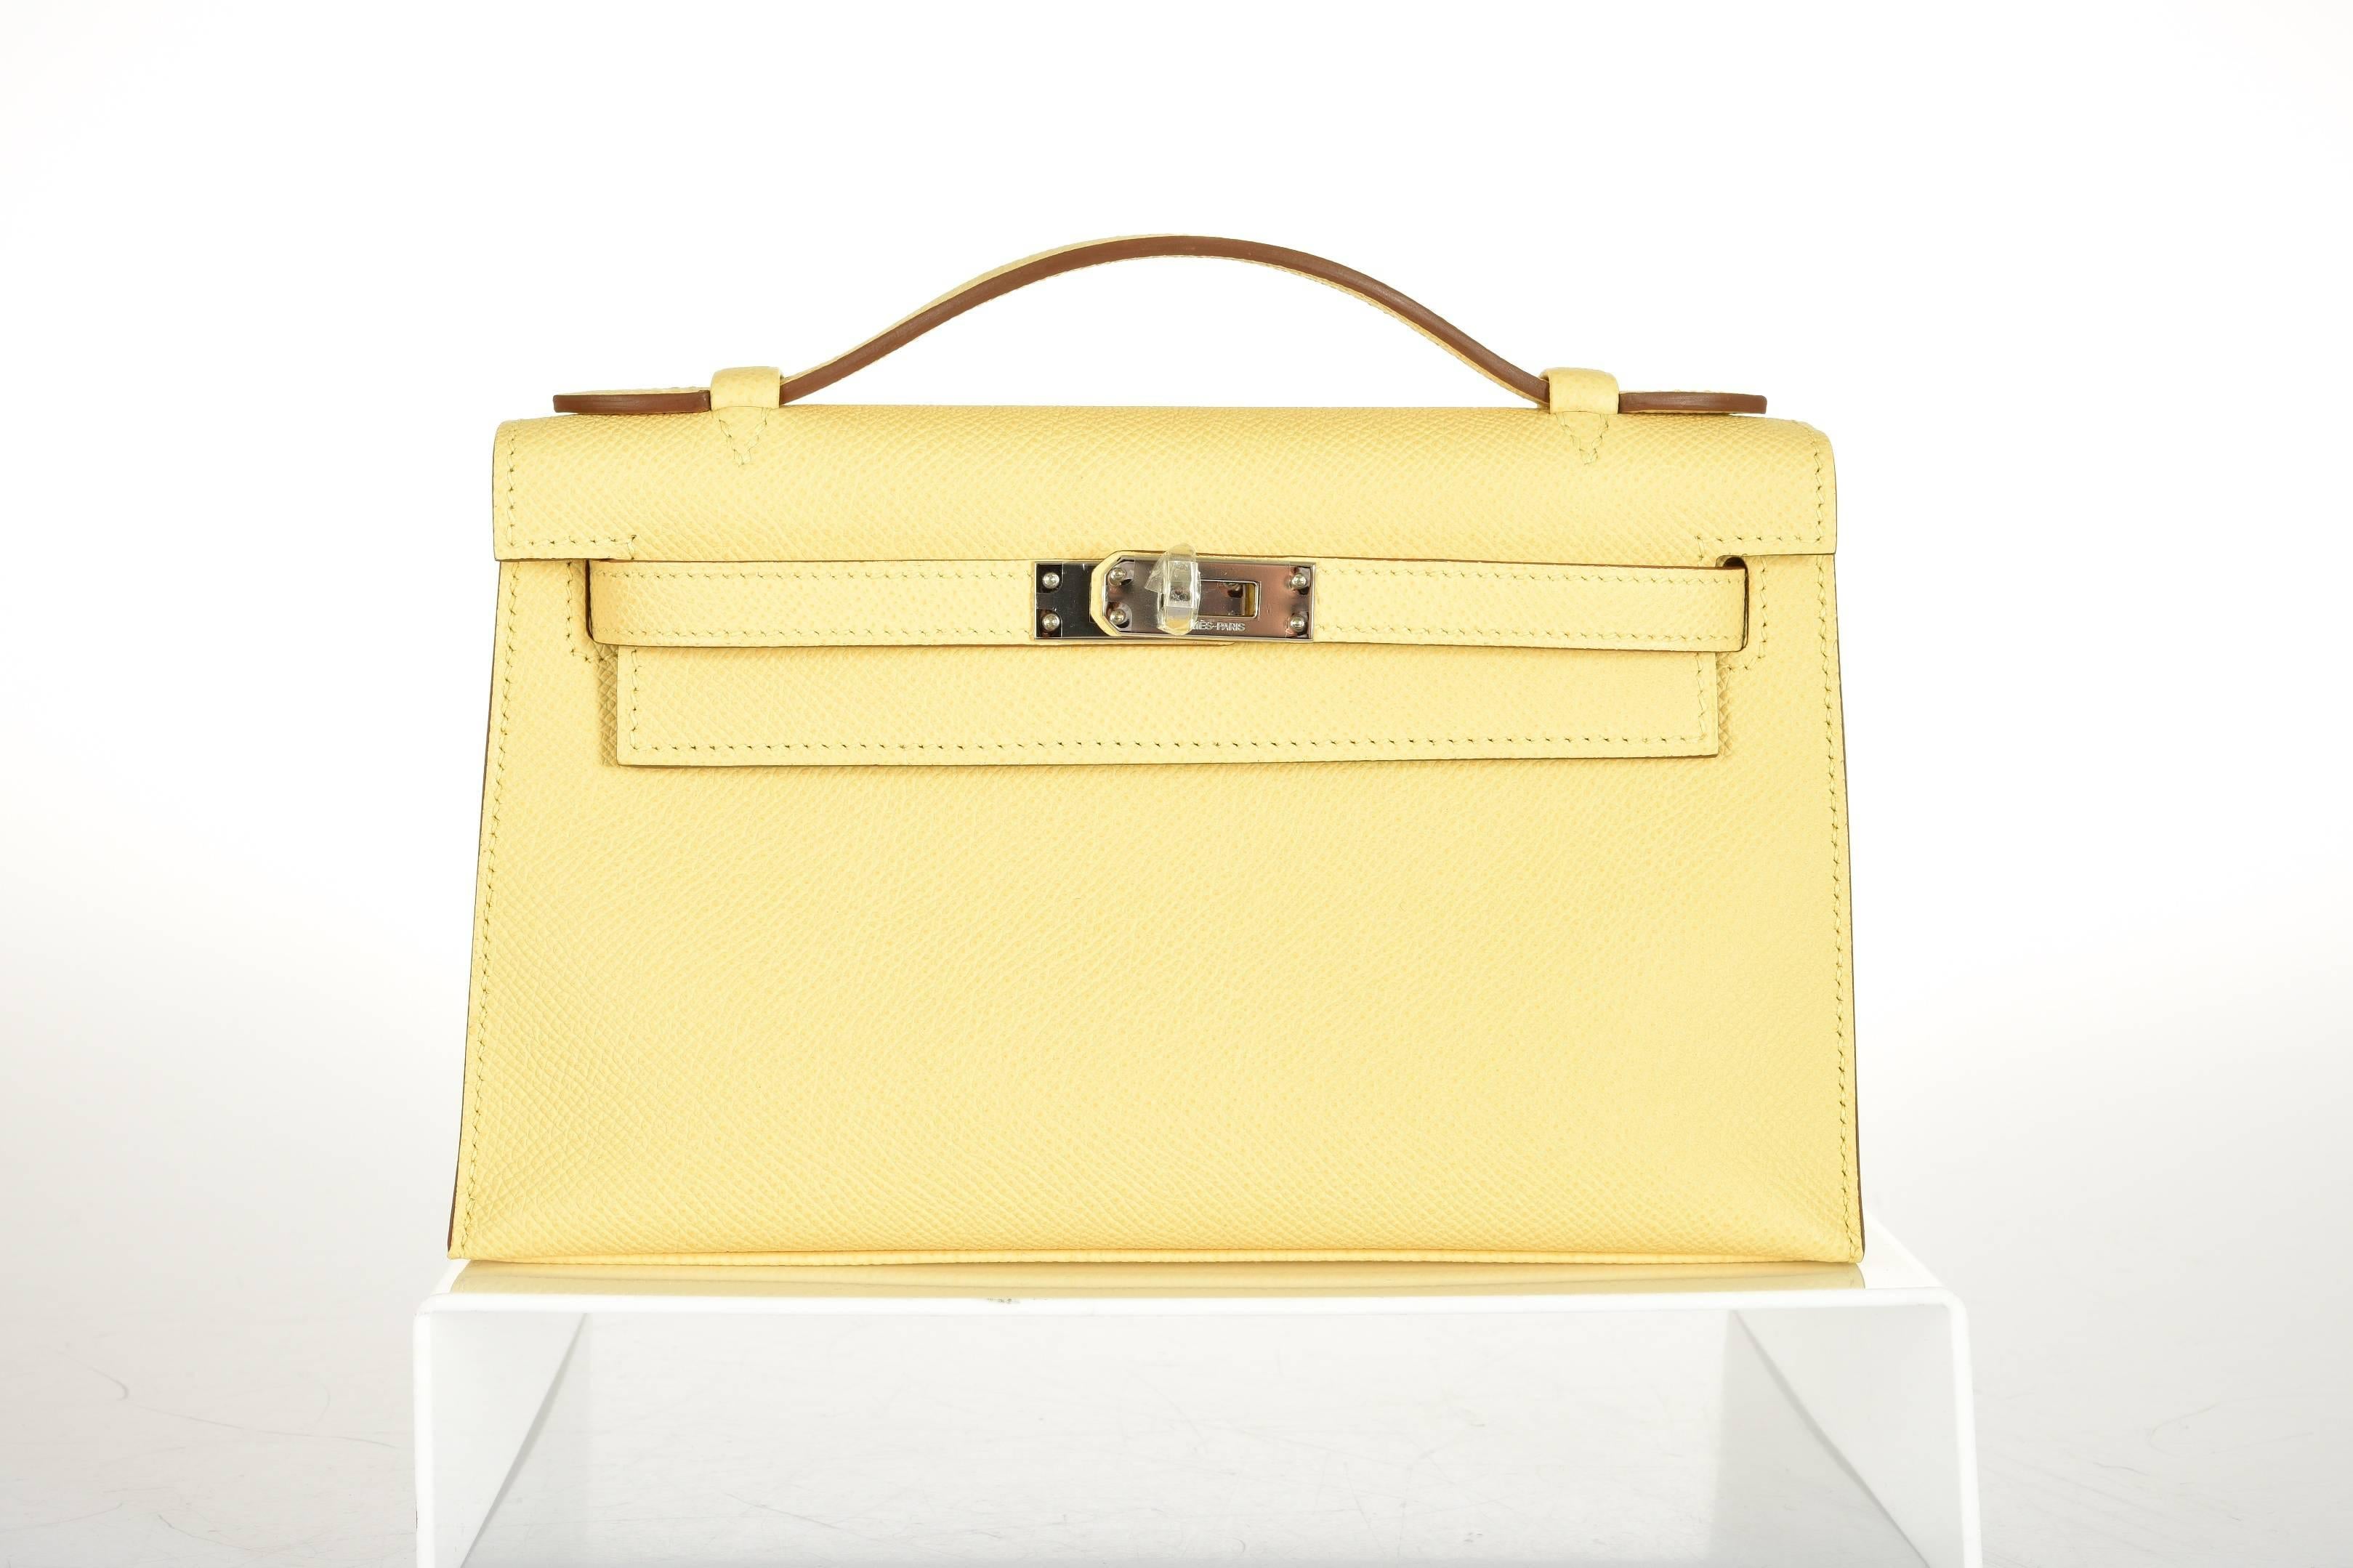 Hermes Jaune Poussin Kelly Pochette Cut Clutch Bag palladium
New condition
Hardware: palladium
Country of Origin: France
Color: Jaune Poussin
Closure: Toggle
Handle Drop (in inches): 1
Height (in inches): 5.5
Width (in inches): 8.5
Depth